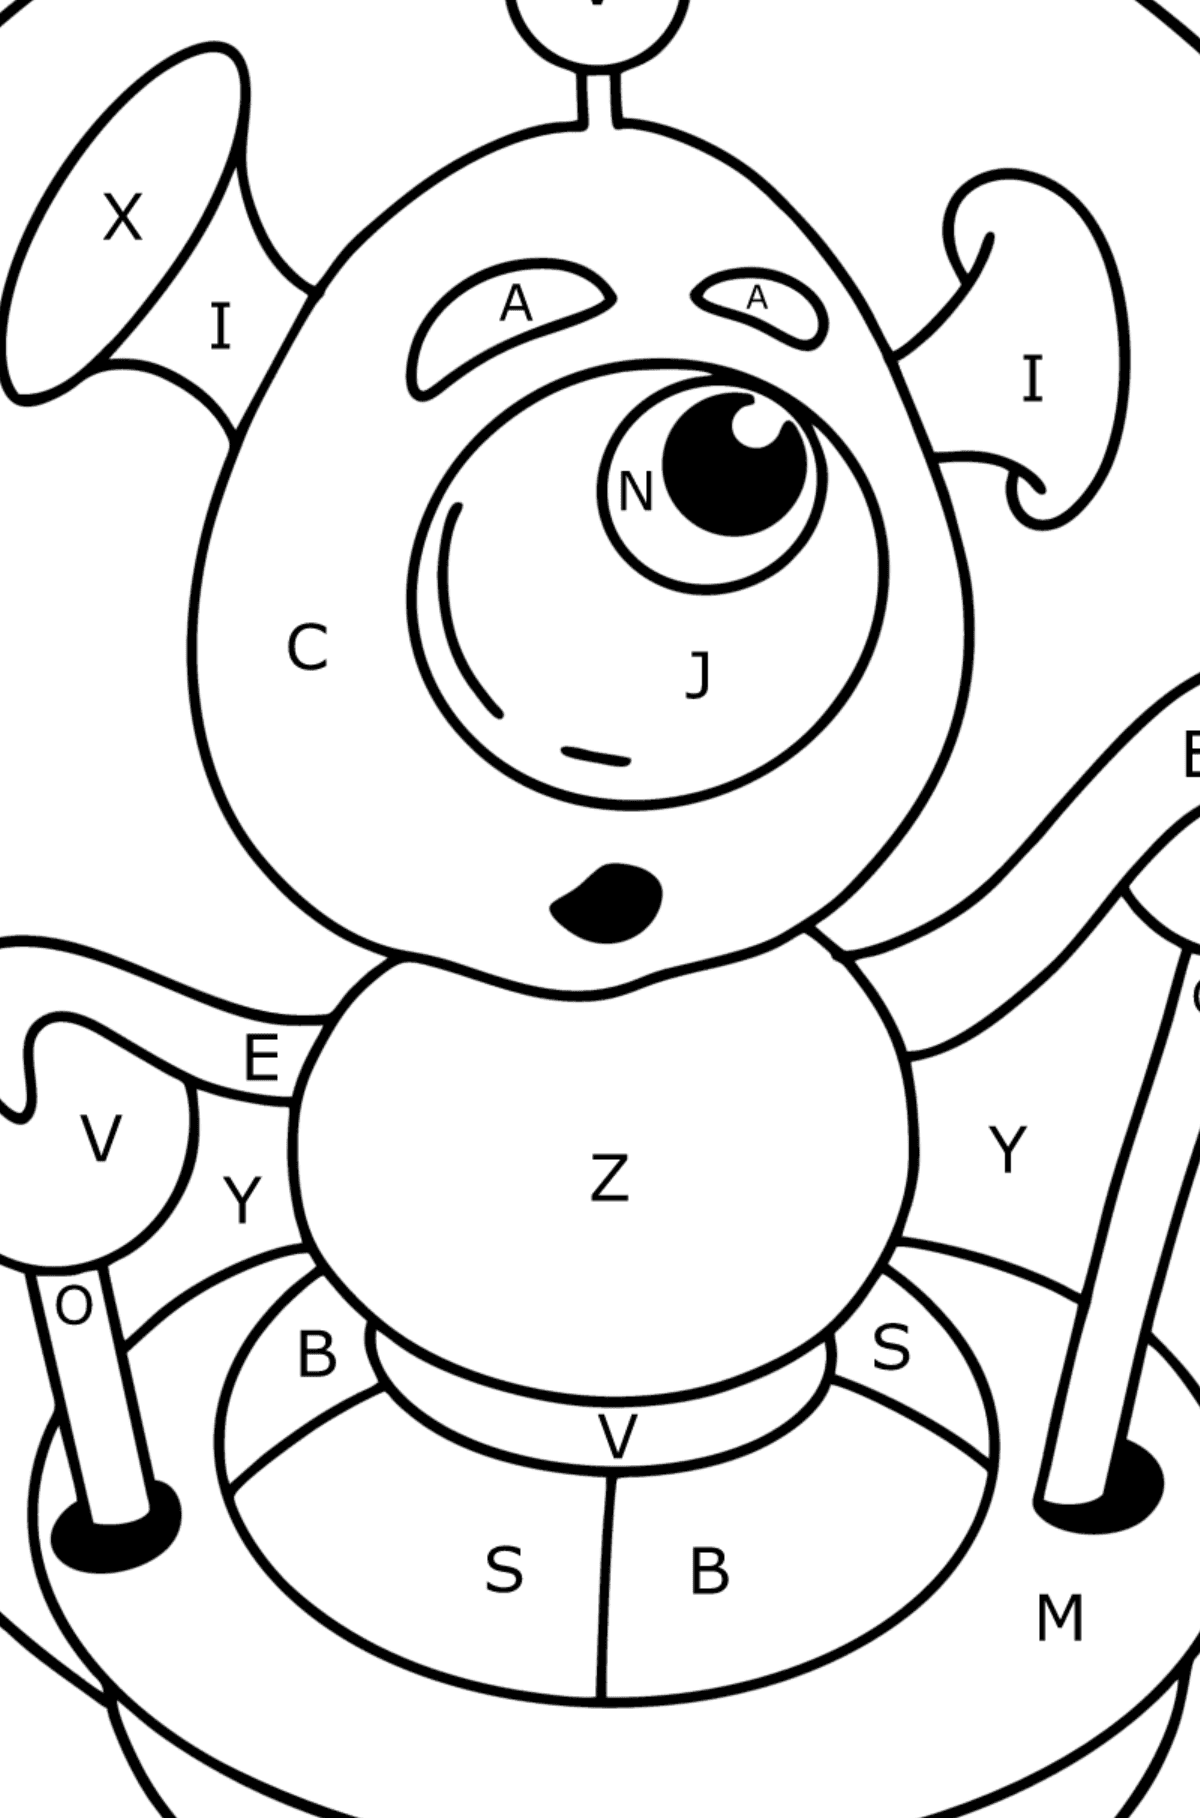 Baby Alien coloring pages - Coloring by Letters for Kids